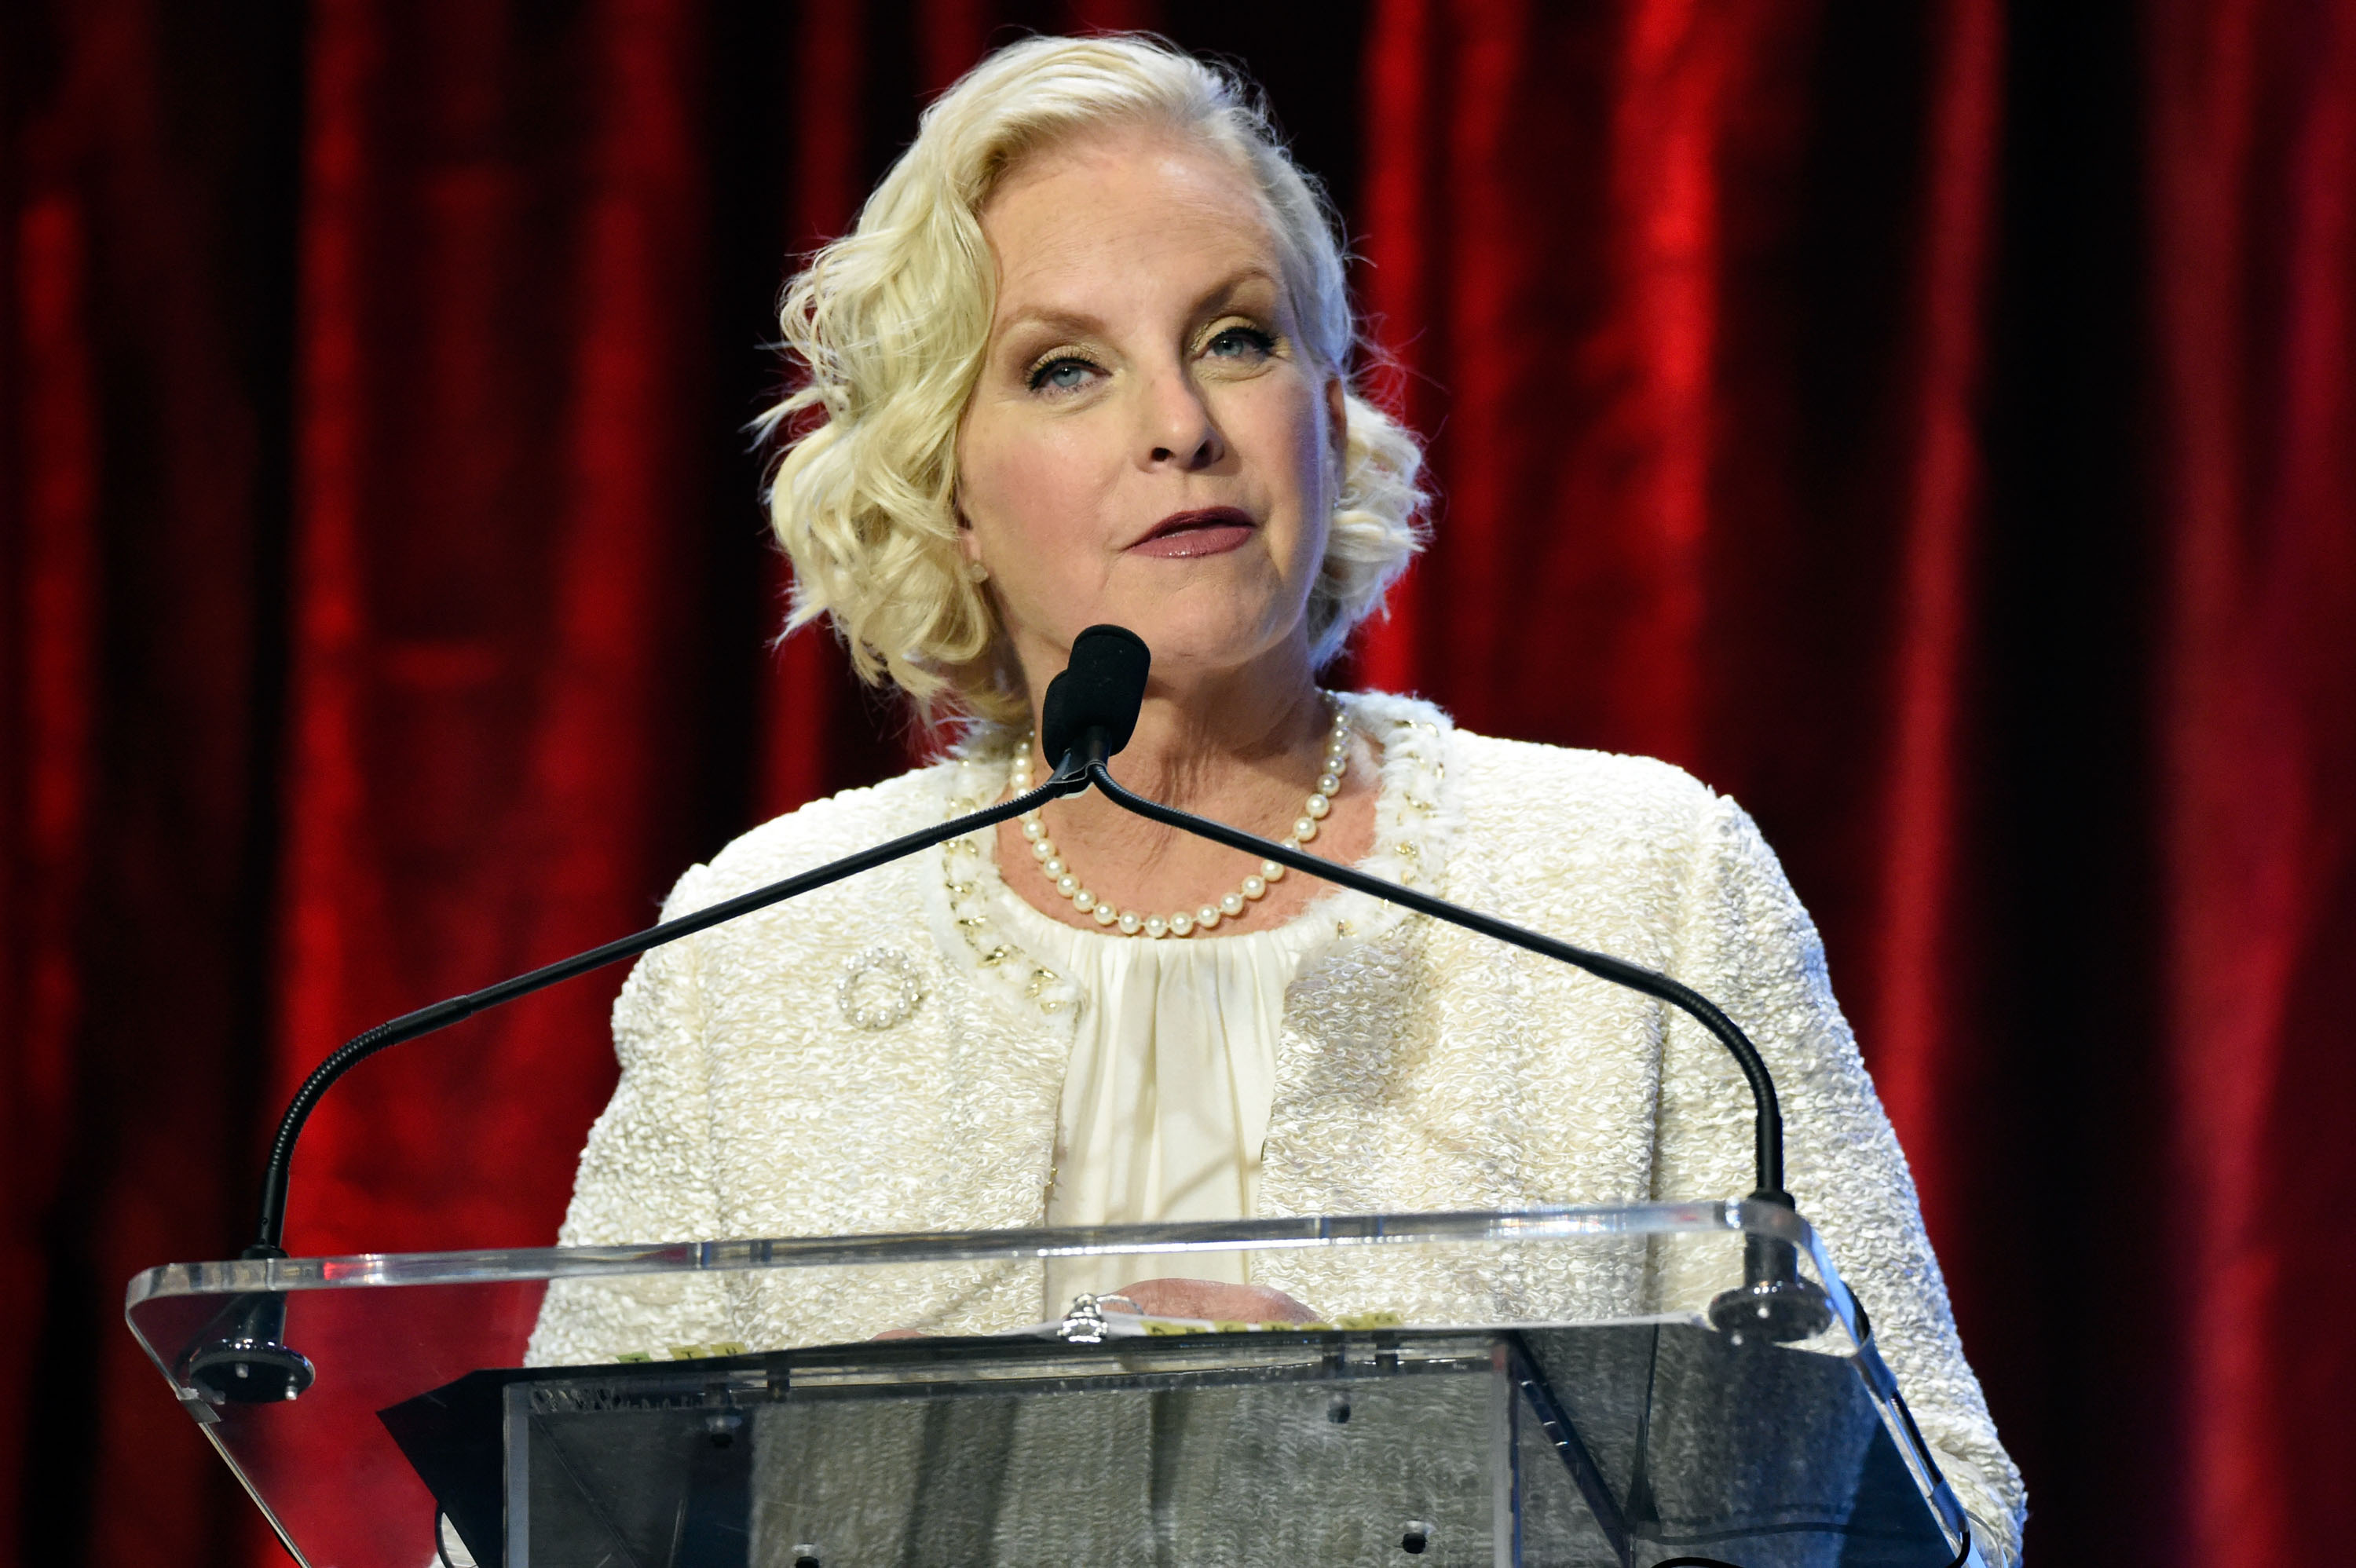 Cindy McCain attends the 2016 Muhammad Ali Humanitarian Awards in Louisville, Kentucky on Sept. 17, 2016. (Stephen J. Cohen&mdash;Getty Images)